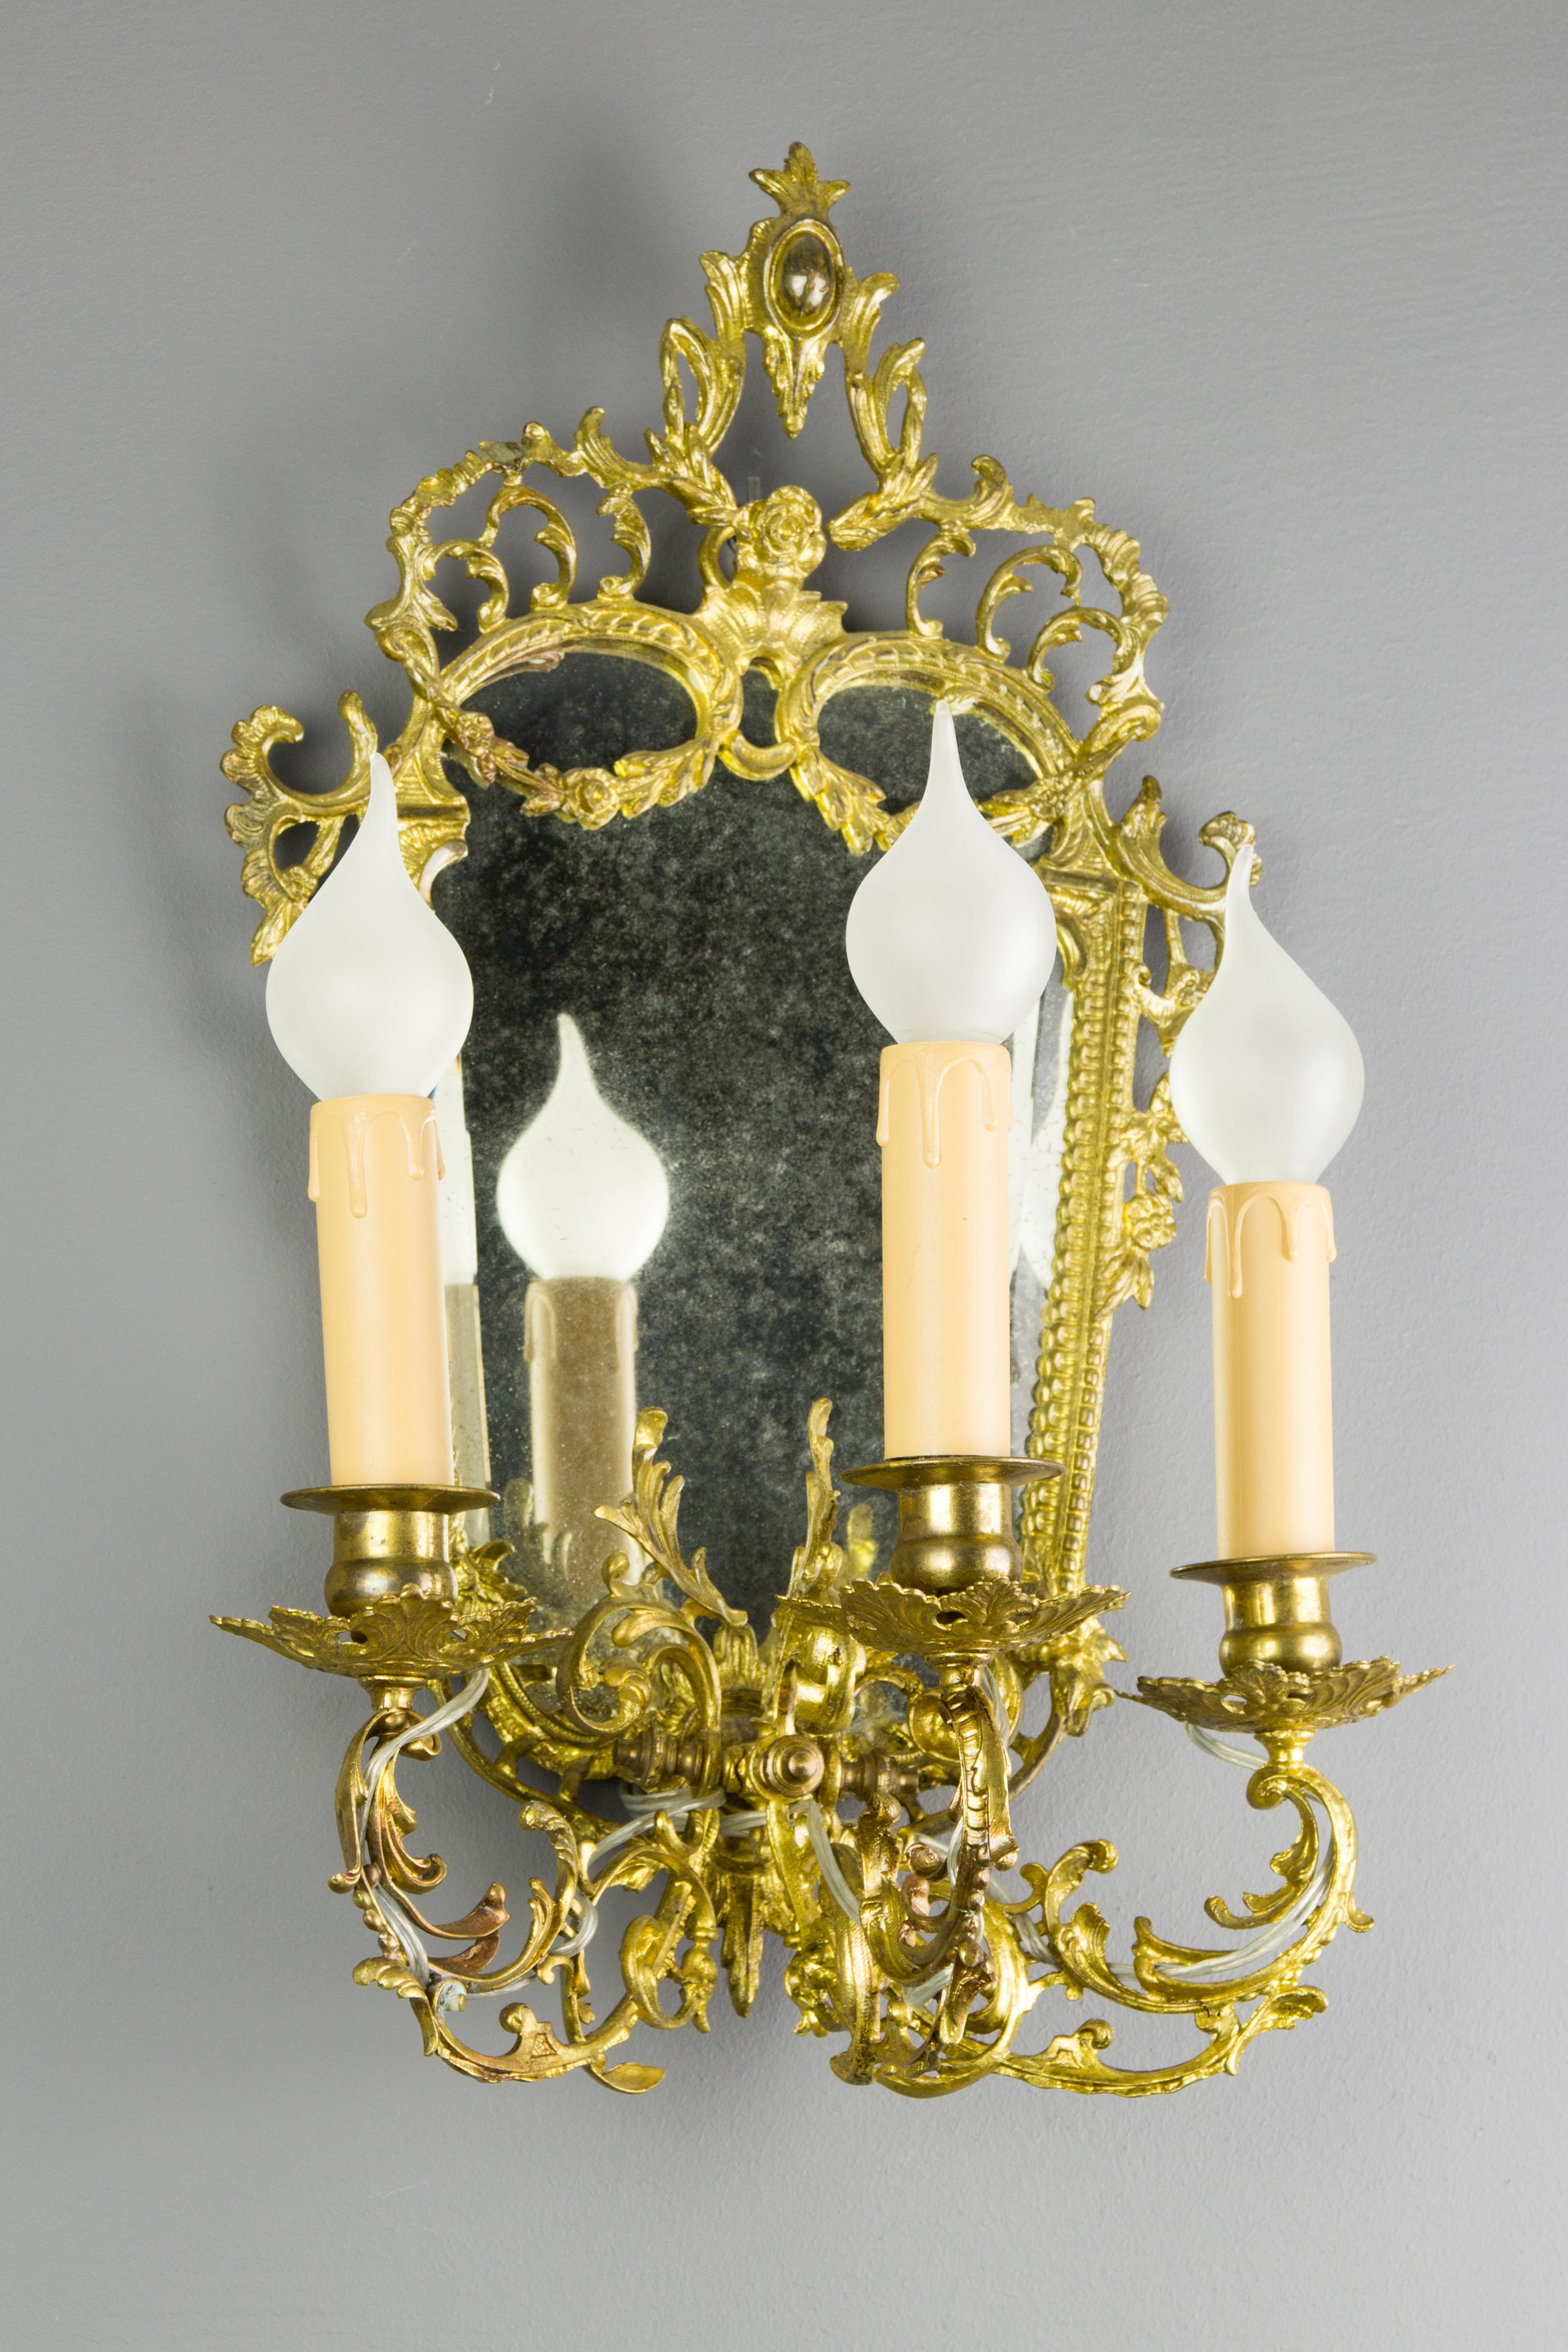 Beautiful Louis XV style brass and bronze girandole, wall sconce with beveled mirror. Three arms, each with a socket for an E14 light bulb, ornate with foliate scrolls and flowers, France, 1920s.
Dimensions: Height 45 cm / 17.71 in, width 30 cm /